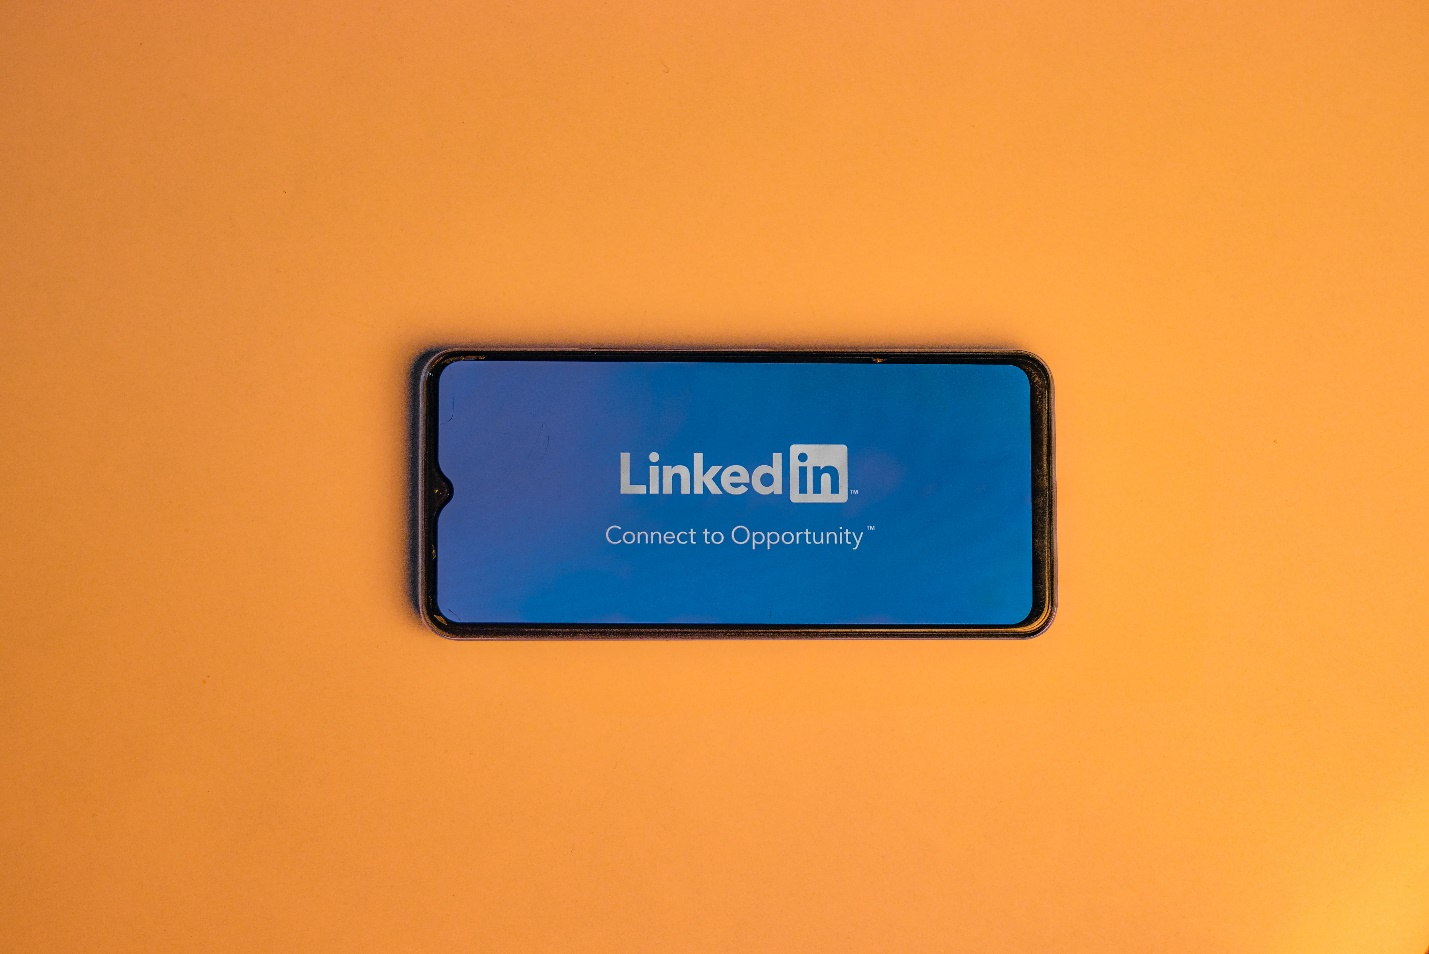 A phone shows the LinkedIn screen saying: Connect to Opportunity on an orange background